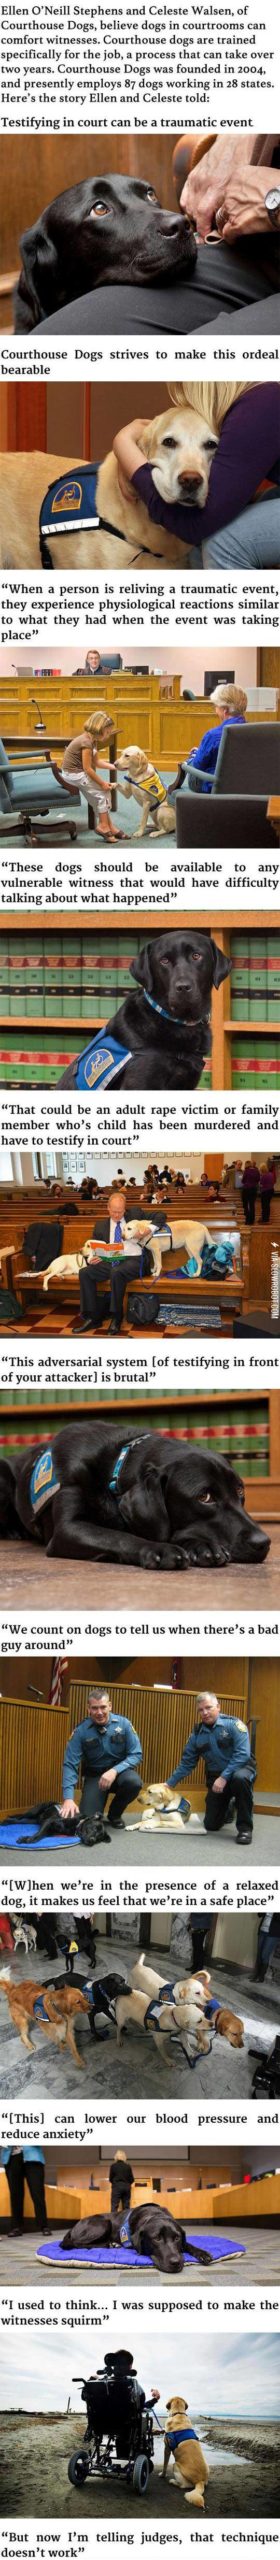 These+Courthouse+Dogs+Are+Trained+to+Comfort+Witnesses+in+Courtrooms